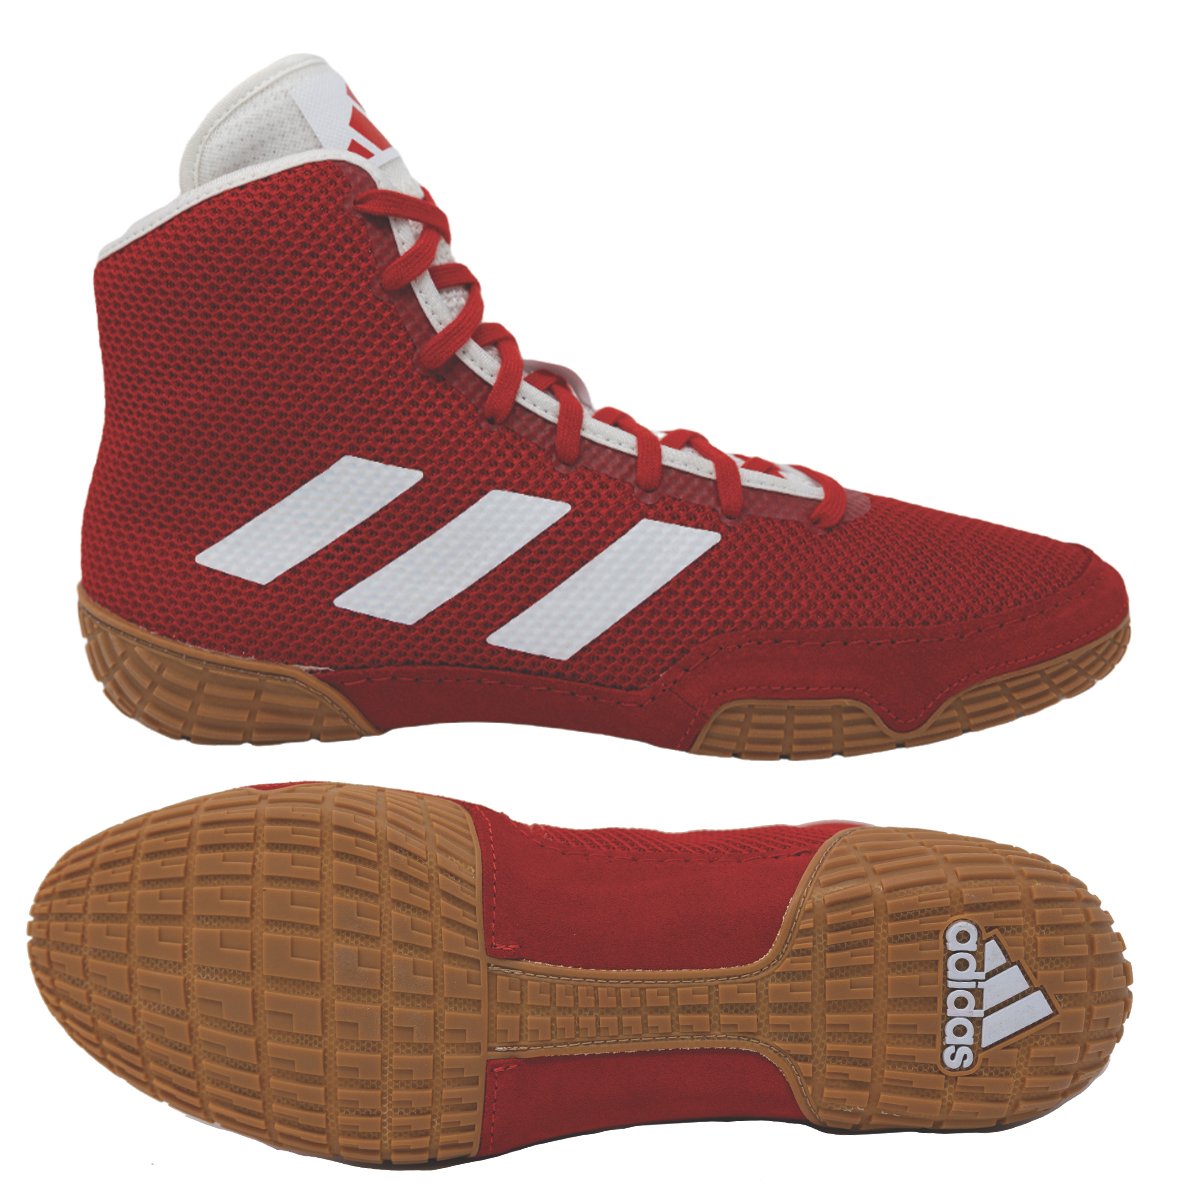 NEW - adidas Tech Fall 2.0 Wrestling Shoe, color: Red/White